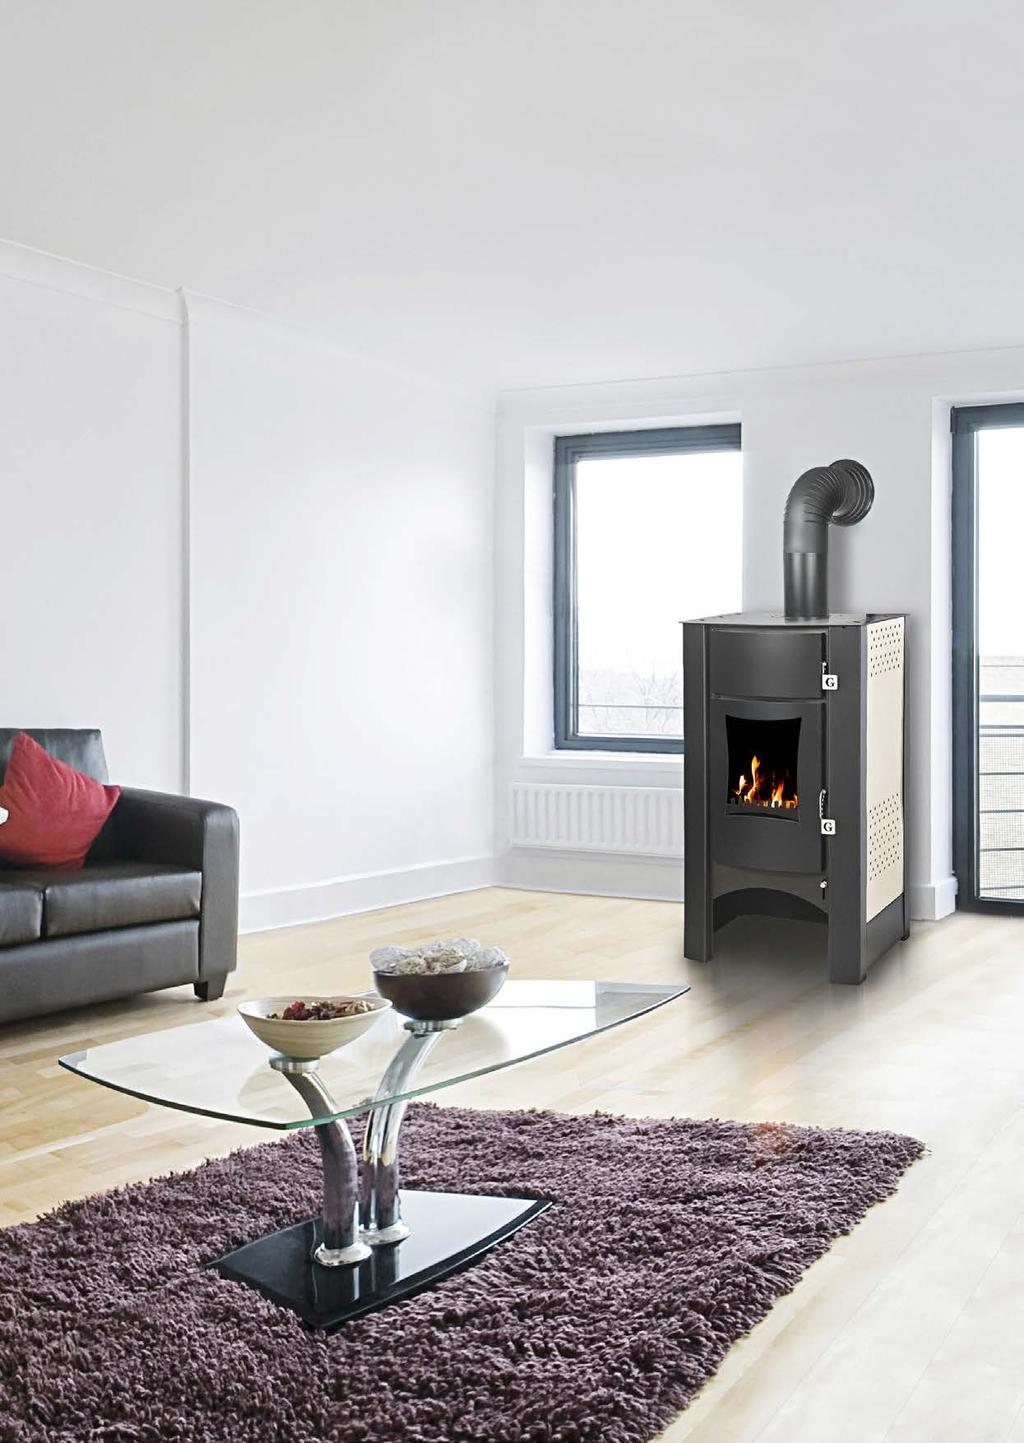 Excellent combination of modern oval design, fast and efficient heating and minimum consumption.